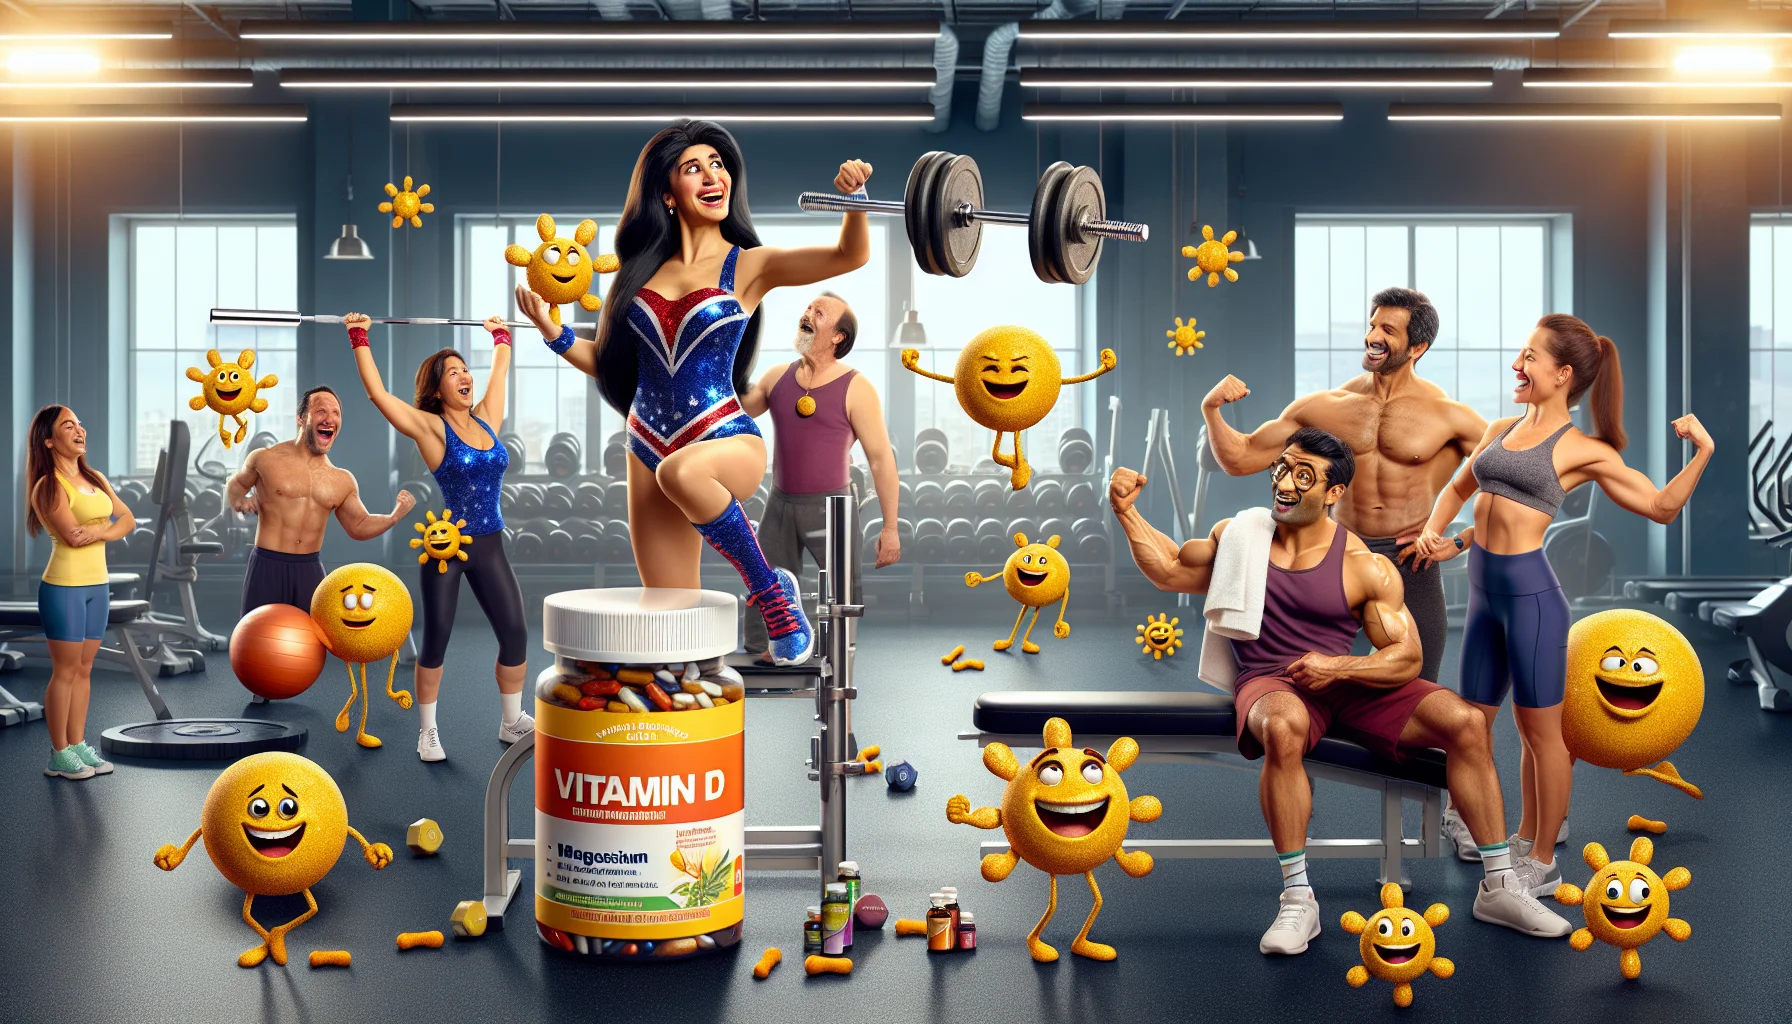 Imagine a humorous scenario set in a gym, presenting vitamin D, magnesium, and turmeric supplements in a light-hearted way. Picture a female South Asian weightlifter in the middle of the enthusiasm, balancing a barbell on her shoulder, covered in a sparkle of sweat. On one side of the gym, there is a table with vitamin D supplements dressed in flashy workout attire, personified with happy faces and stability balls at their feet. On the other side, amused gym-goers, a Middle Eastern man and a Caucasian woman, laugh as humorous turmeric and magnesium supplements flex their muscles and show off their strength. The entire gym scene shines with a healthy aura, subtly implying the connection between these supplements and sports performance.